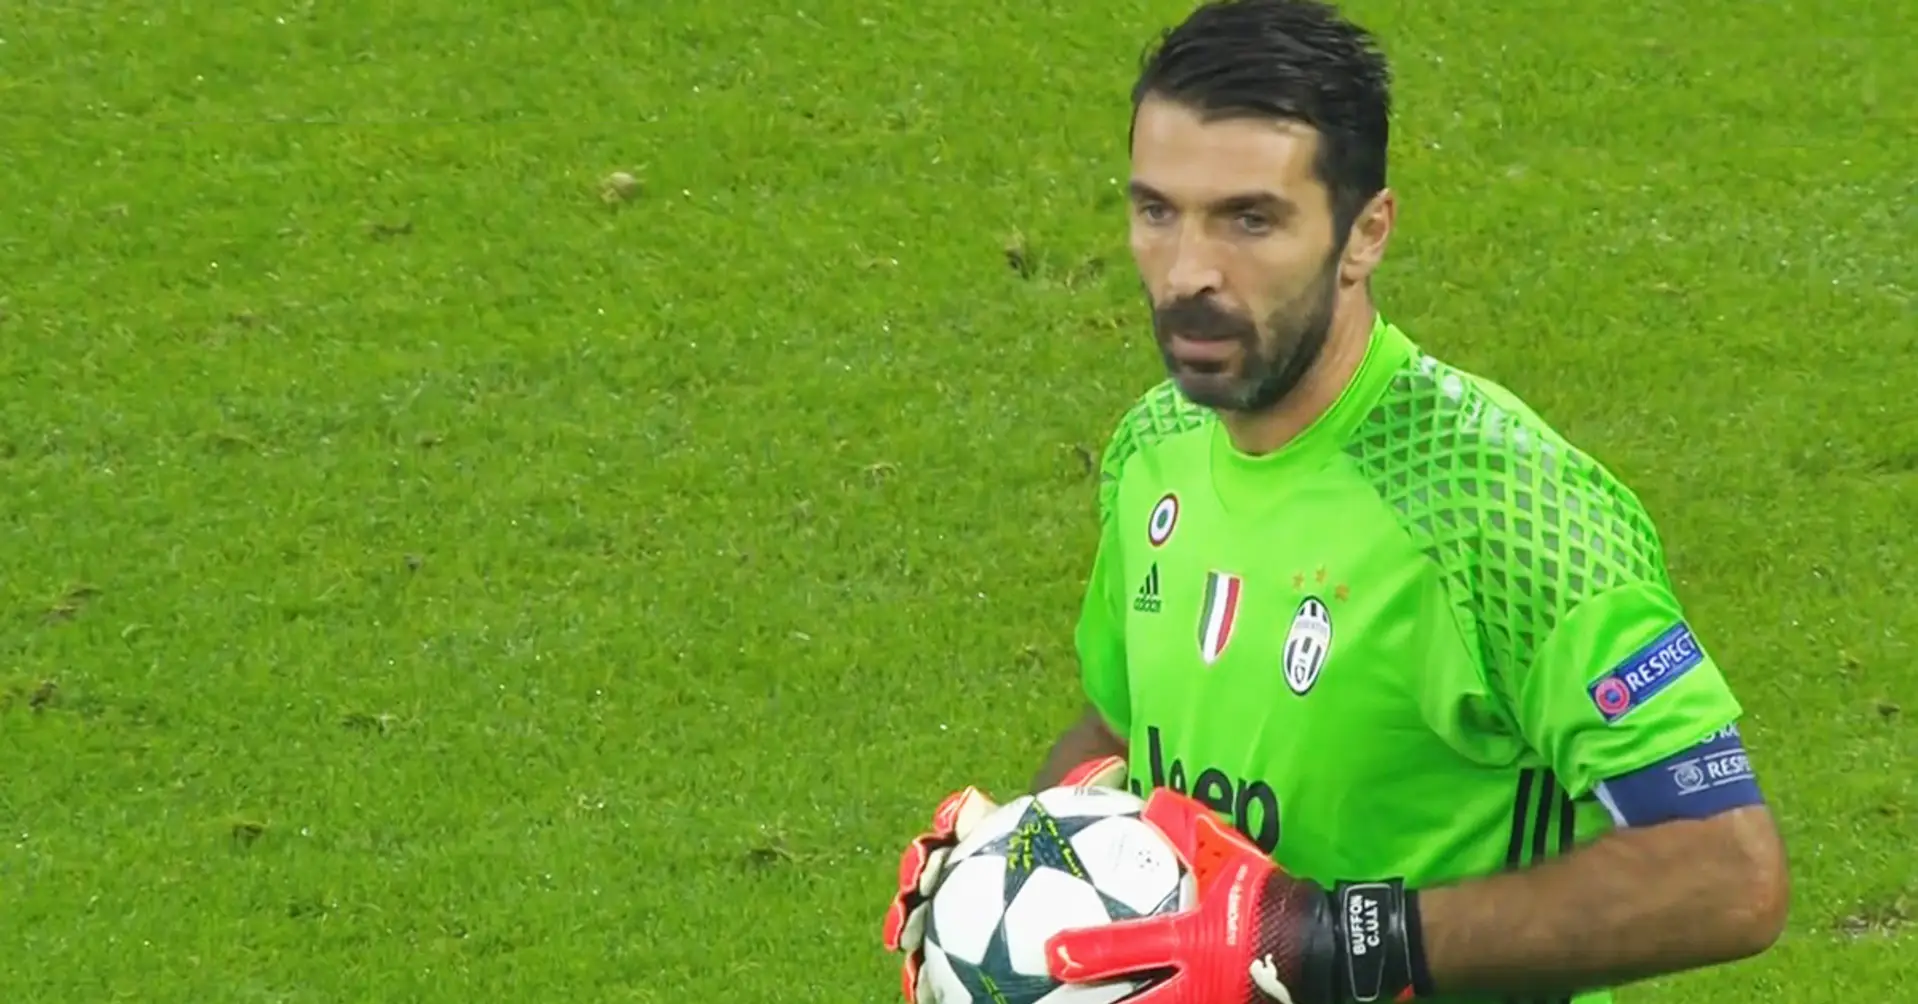 ‘We heard you’re looking for a challenge’. 3 European clubs interested in Gianluigi Buffon have been revealed